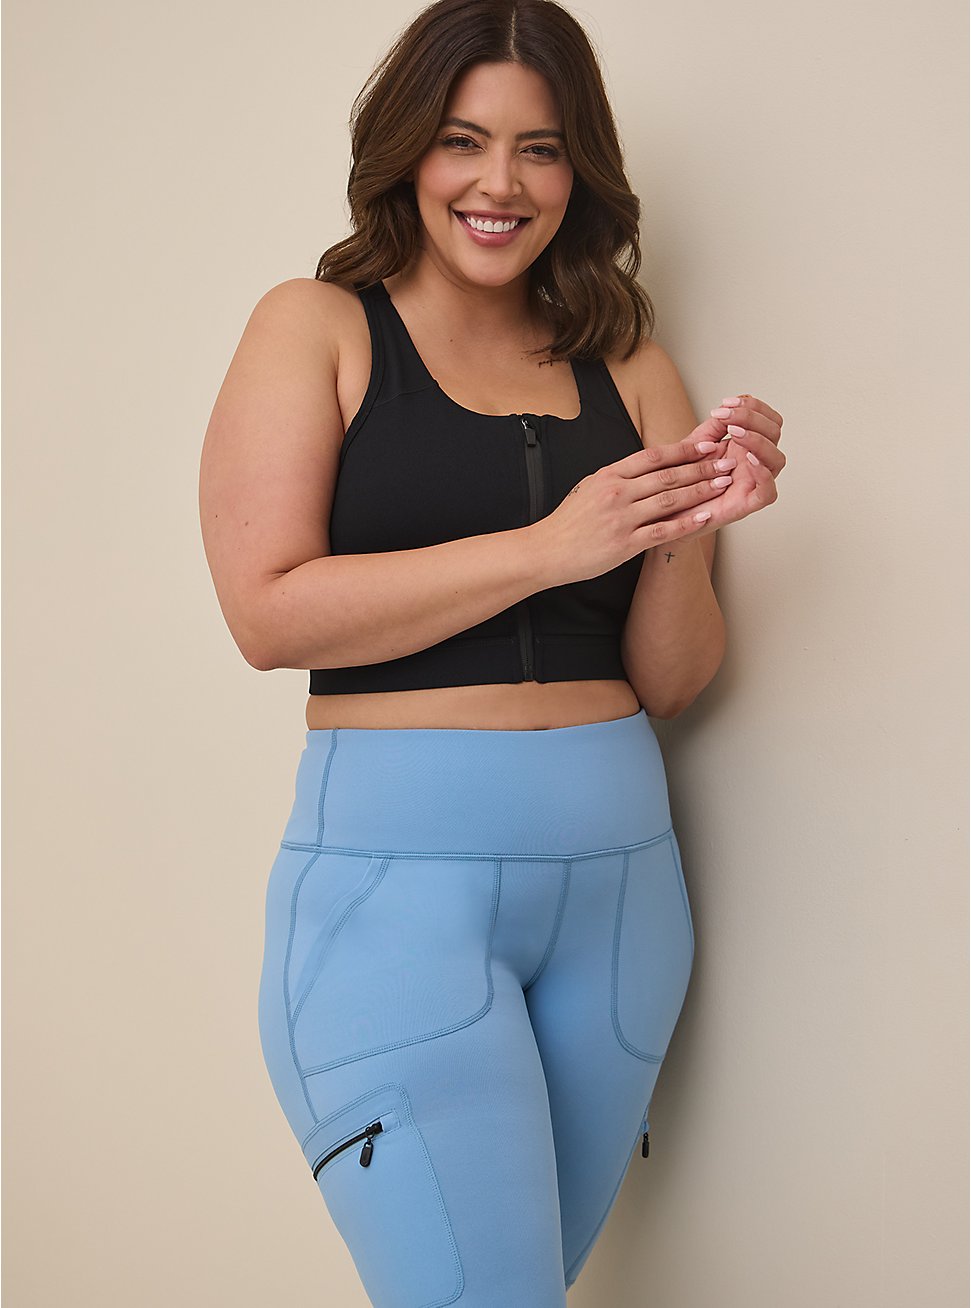 Plus Size Happy Camper Performance Core Full Length Active Legging With Cargo Pocket, BLUE ICE, hi-res